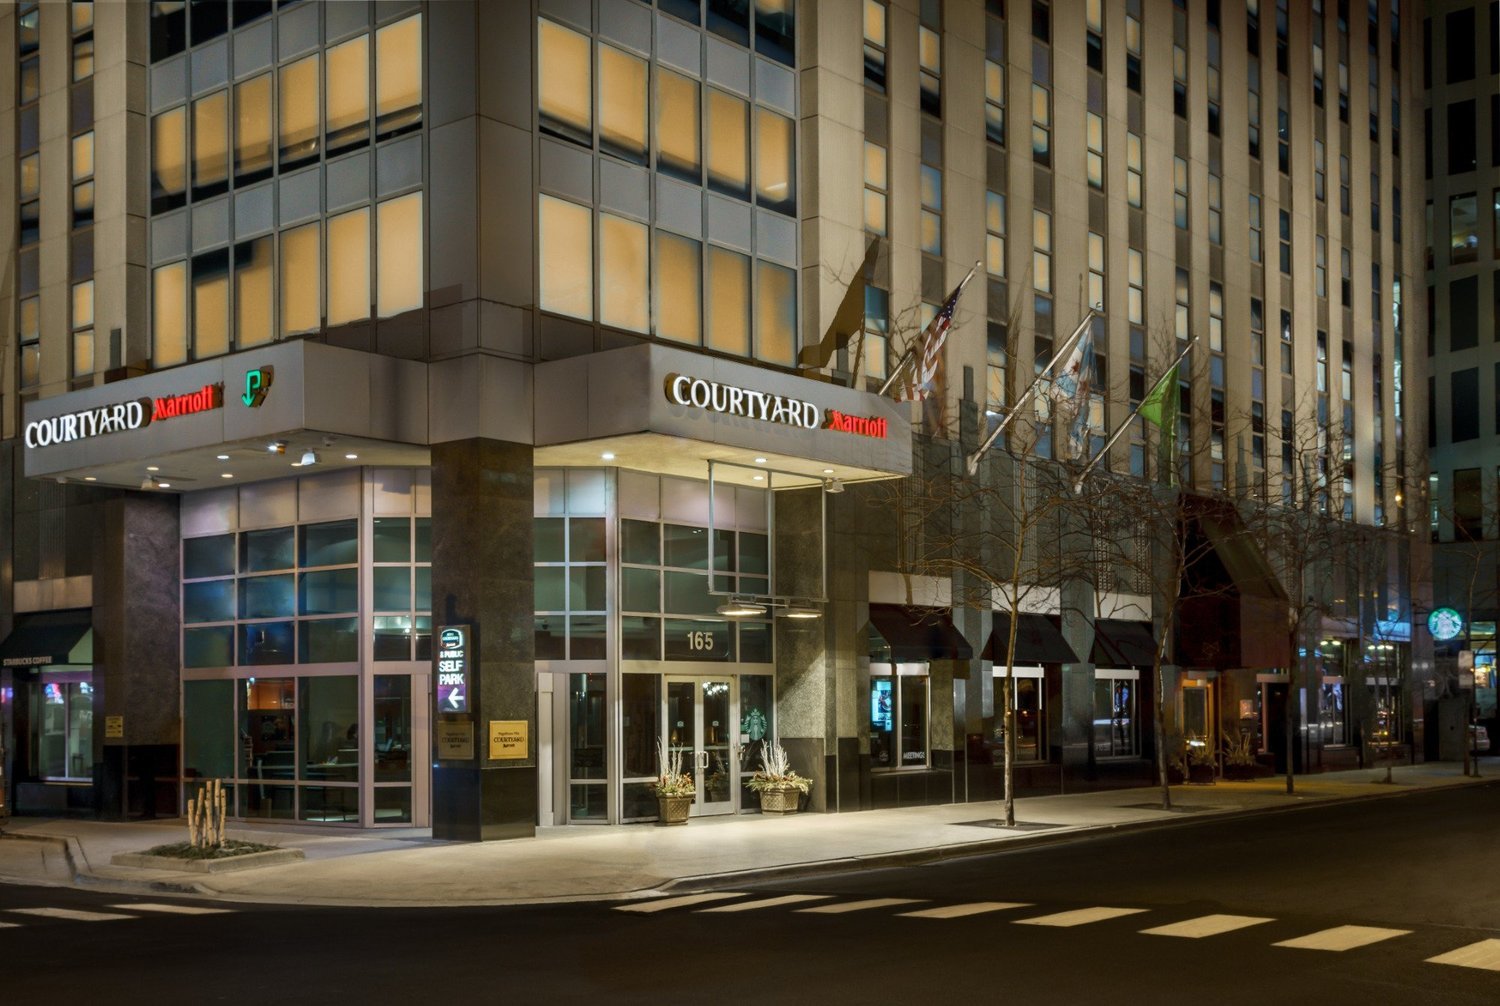 Courtyard by Marriott Chicago Downtown/Magnificent Mile, Chicago, IL